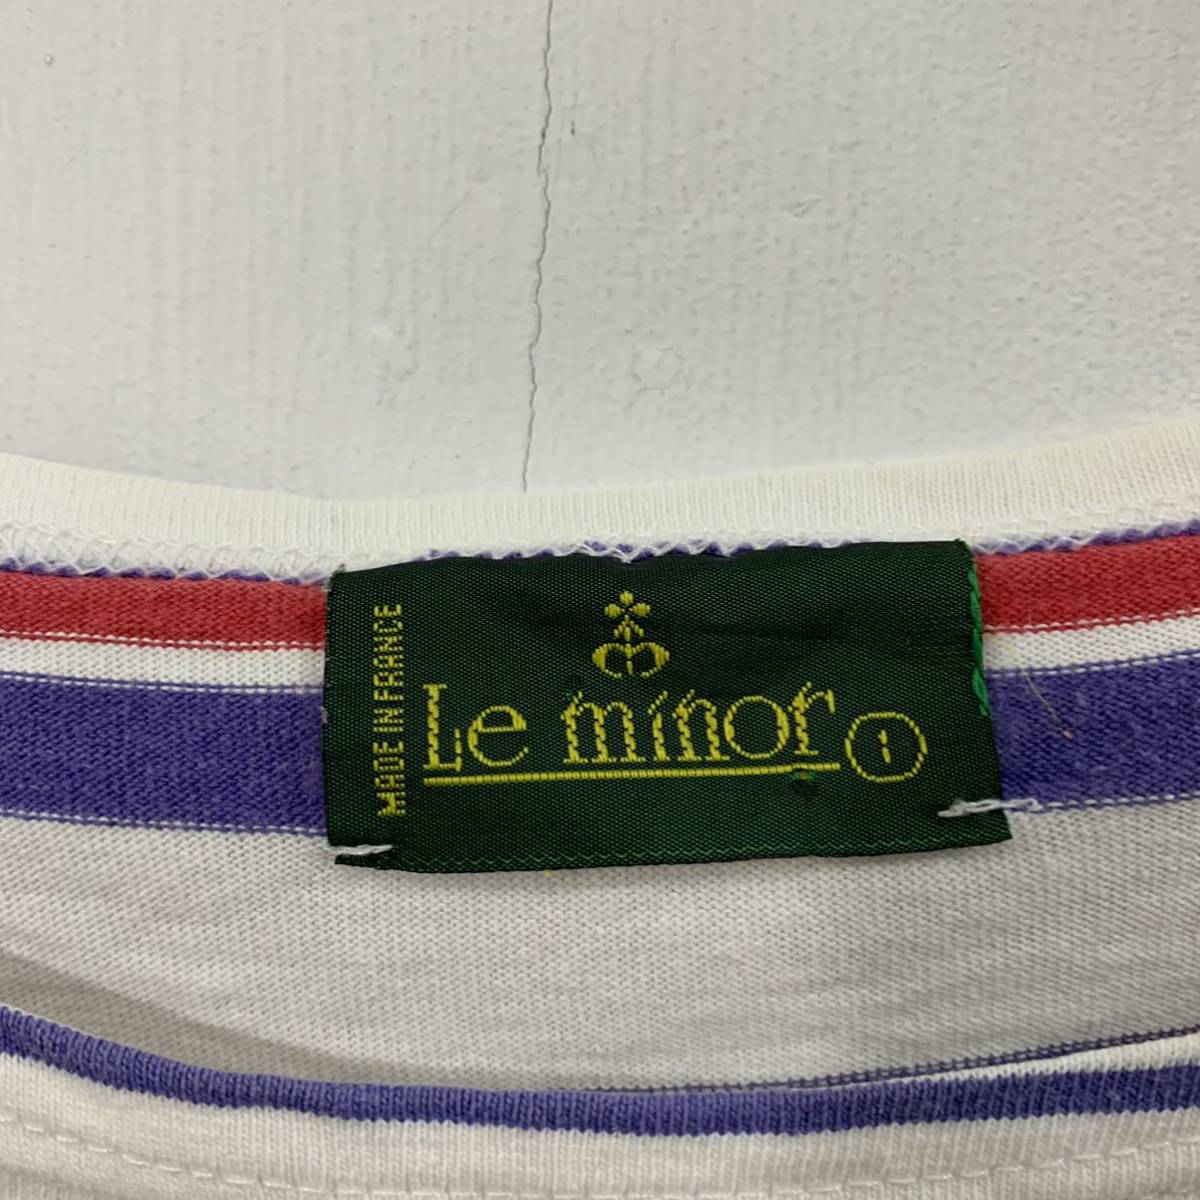 Le minor France made bus k shirt border cut and sewn border T-shirt standard finest quality one Point Le Minor [ letter pack post service plus mailing possible ]E